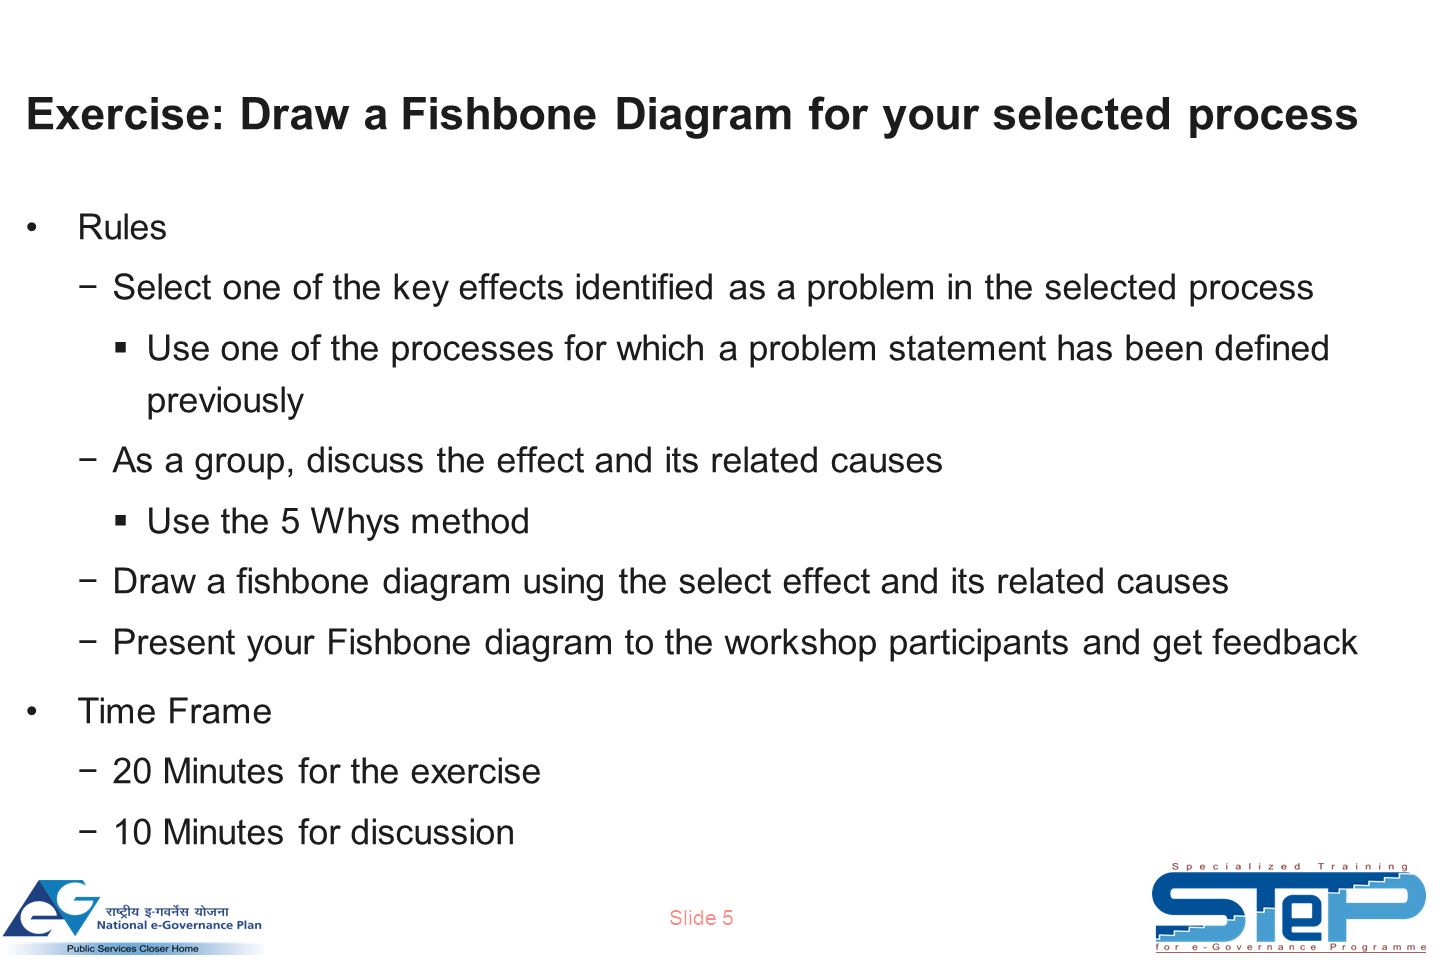 Slide 5 Exercise: Draw a Fishbone Diagram for your selected process Rules −Select one of the key effects identified as a problem in the selected process  Use one of the processes for which a problem statement has been defined previously −As a group, discuss the effect and its related causes  Use the 5 Whys method −Draw a fishbone diagram using the select effect and its related causes −Present your Fishbone diagram to the workshop participants and get feedback Time Frame −20 Minutes for the exercise −10 Minutes for discussion